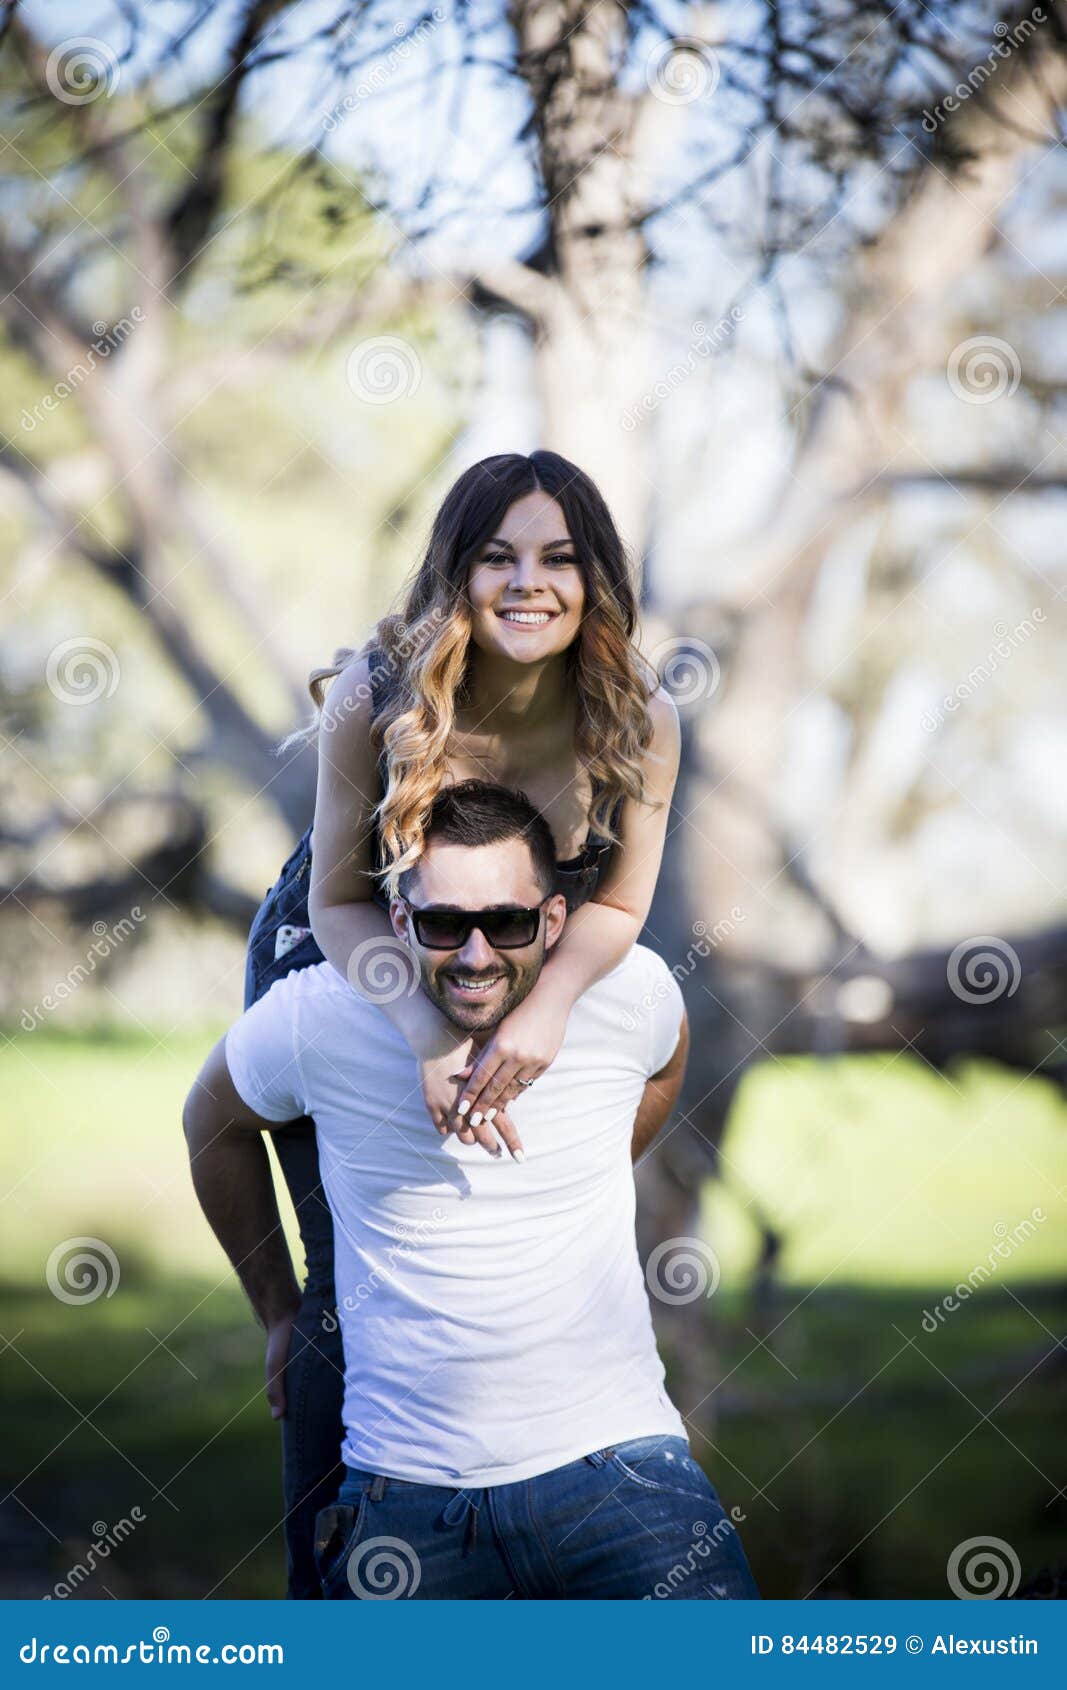 20 Beautiful Couple Poses for Any Occasion (Boyfriend & Girlfriend Poses)